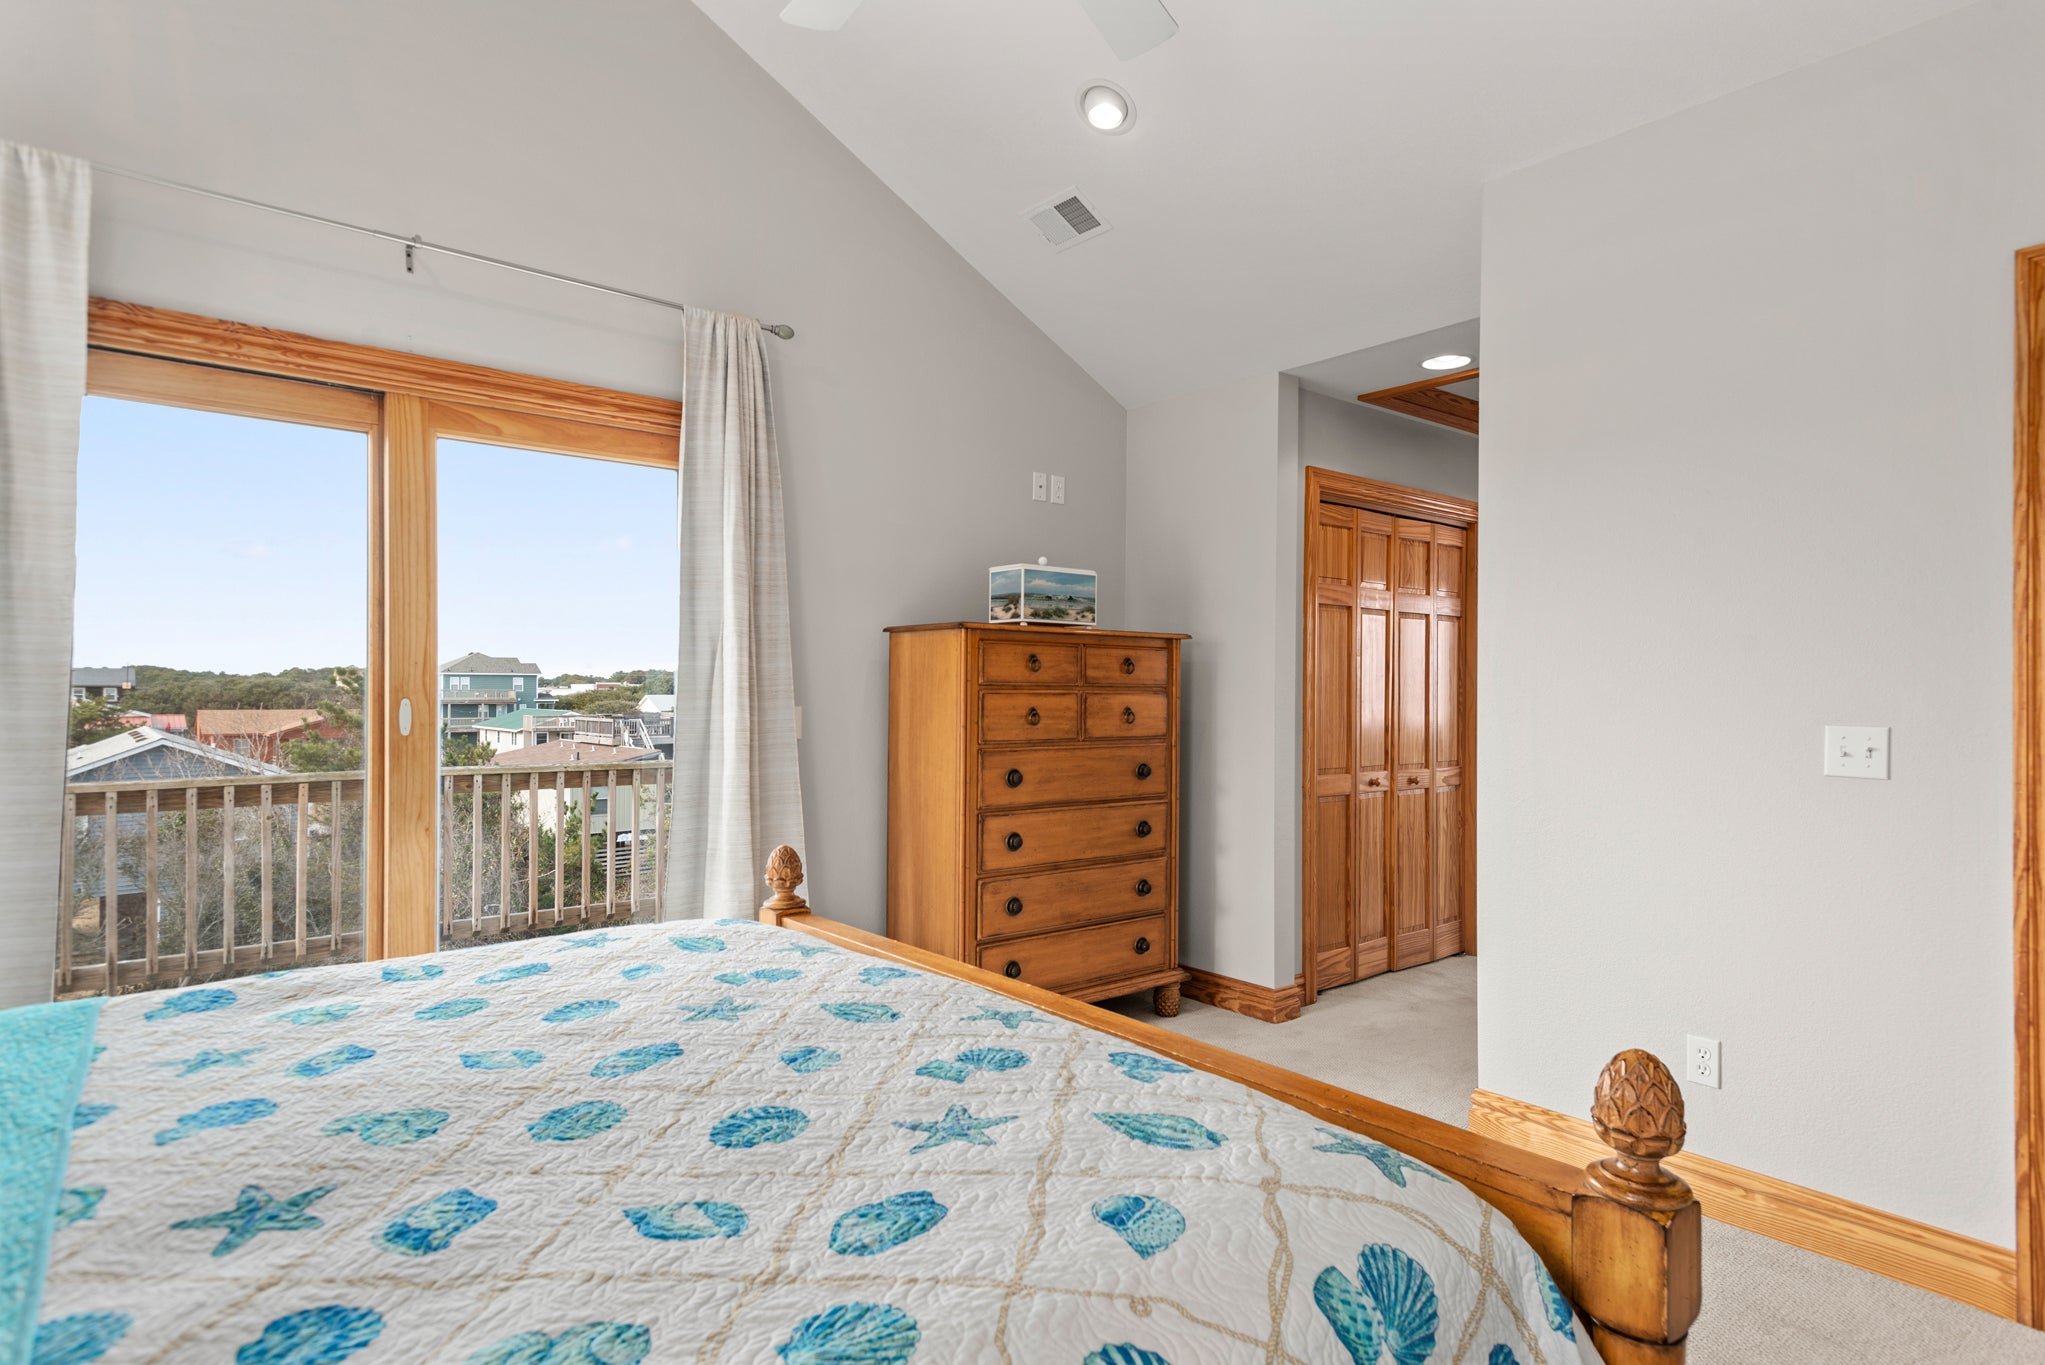 KDN2208: Sea A Chance | Top Level Bedroom 5